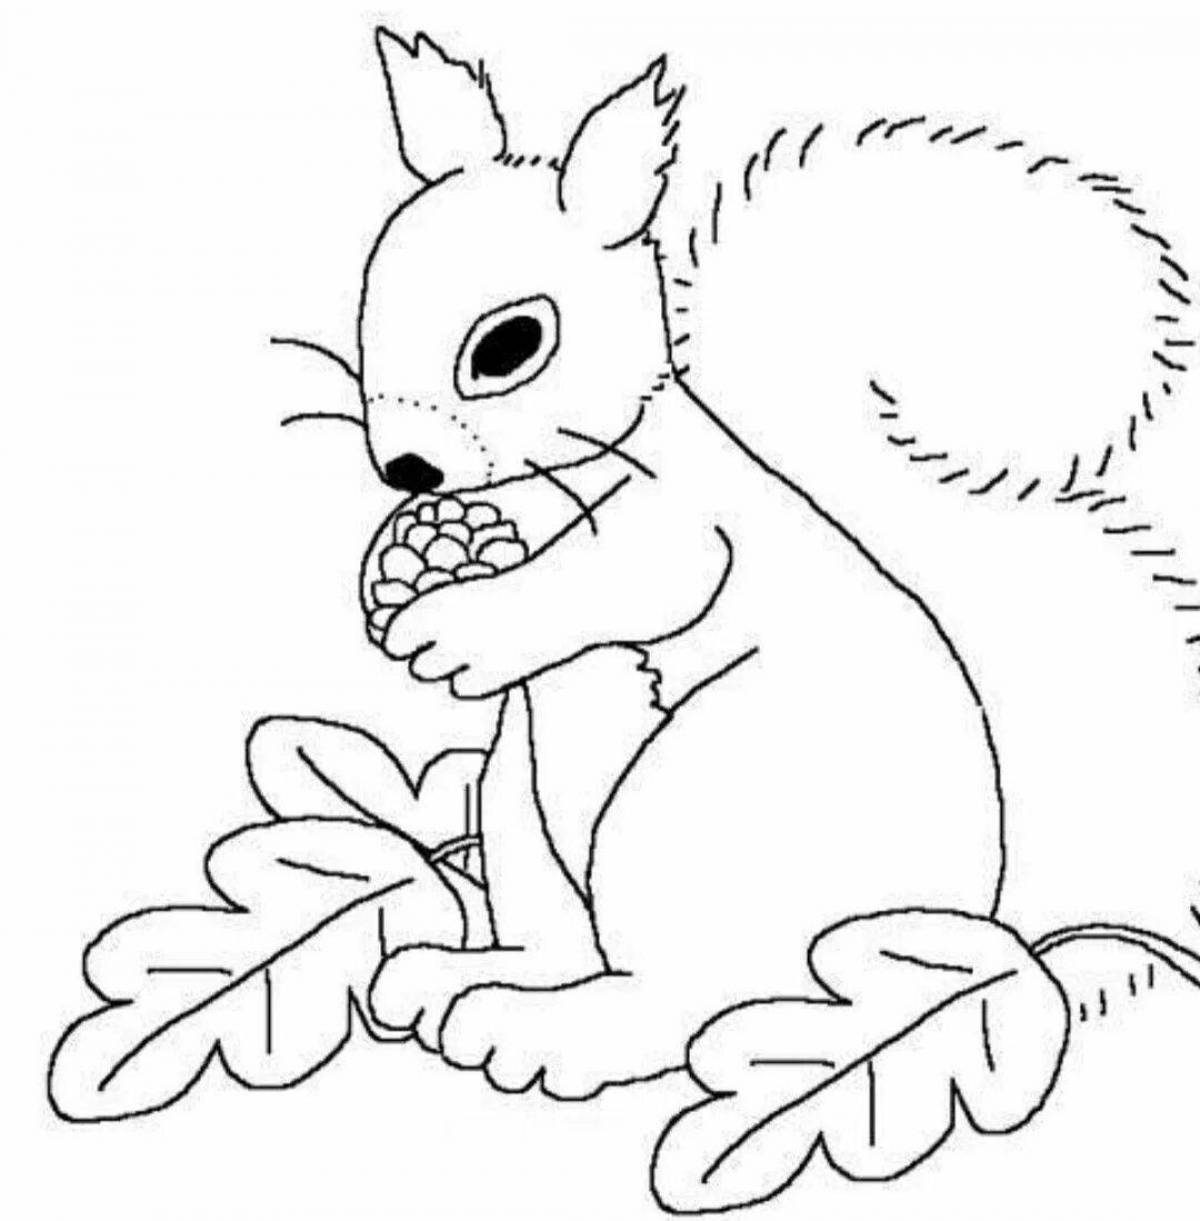 Squirrel live coloring for children 6-7 years old